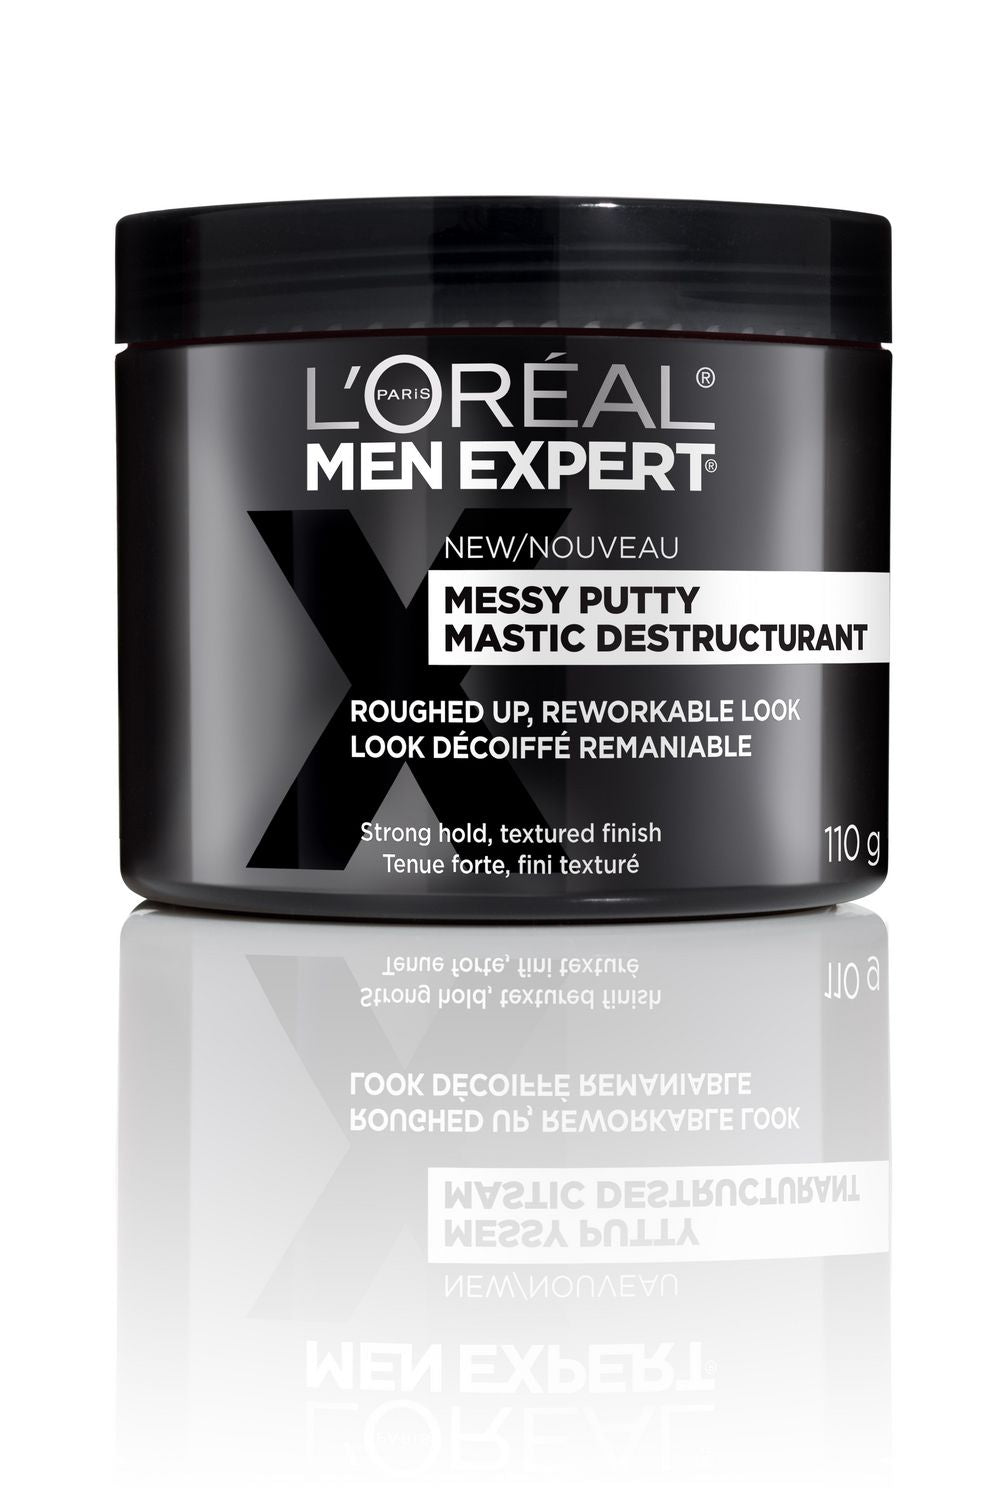 L'Oreal Men Expert Messy Putty - 110 g